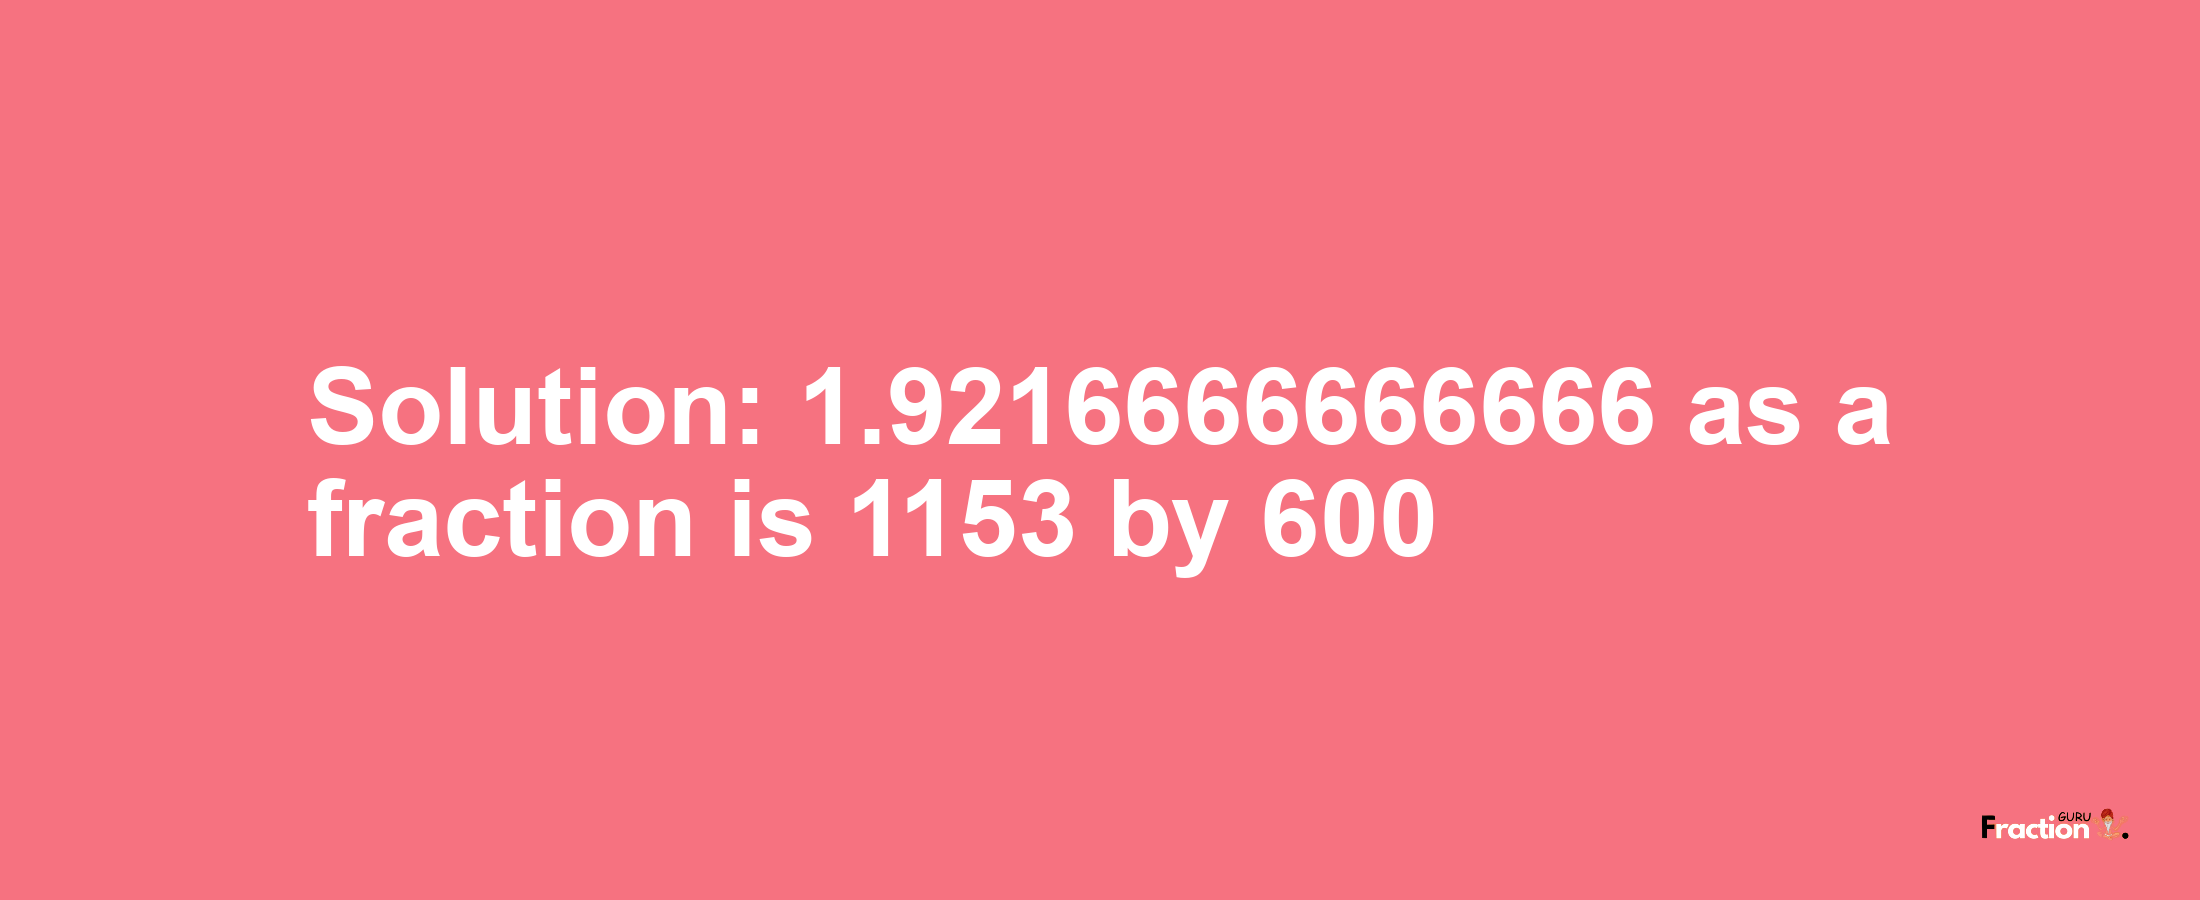 Solution:1.9216666666666 as a fraction is 1153/600